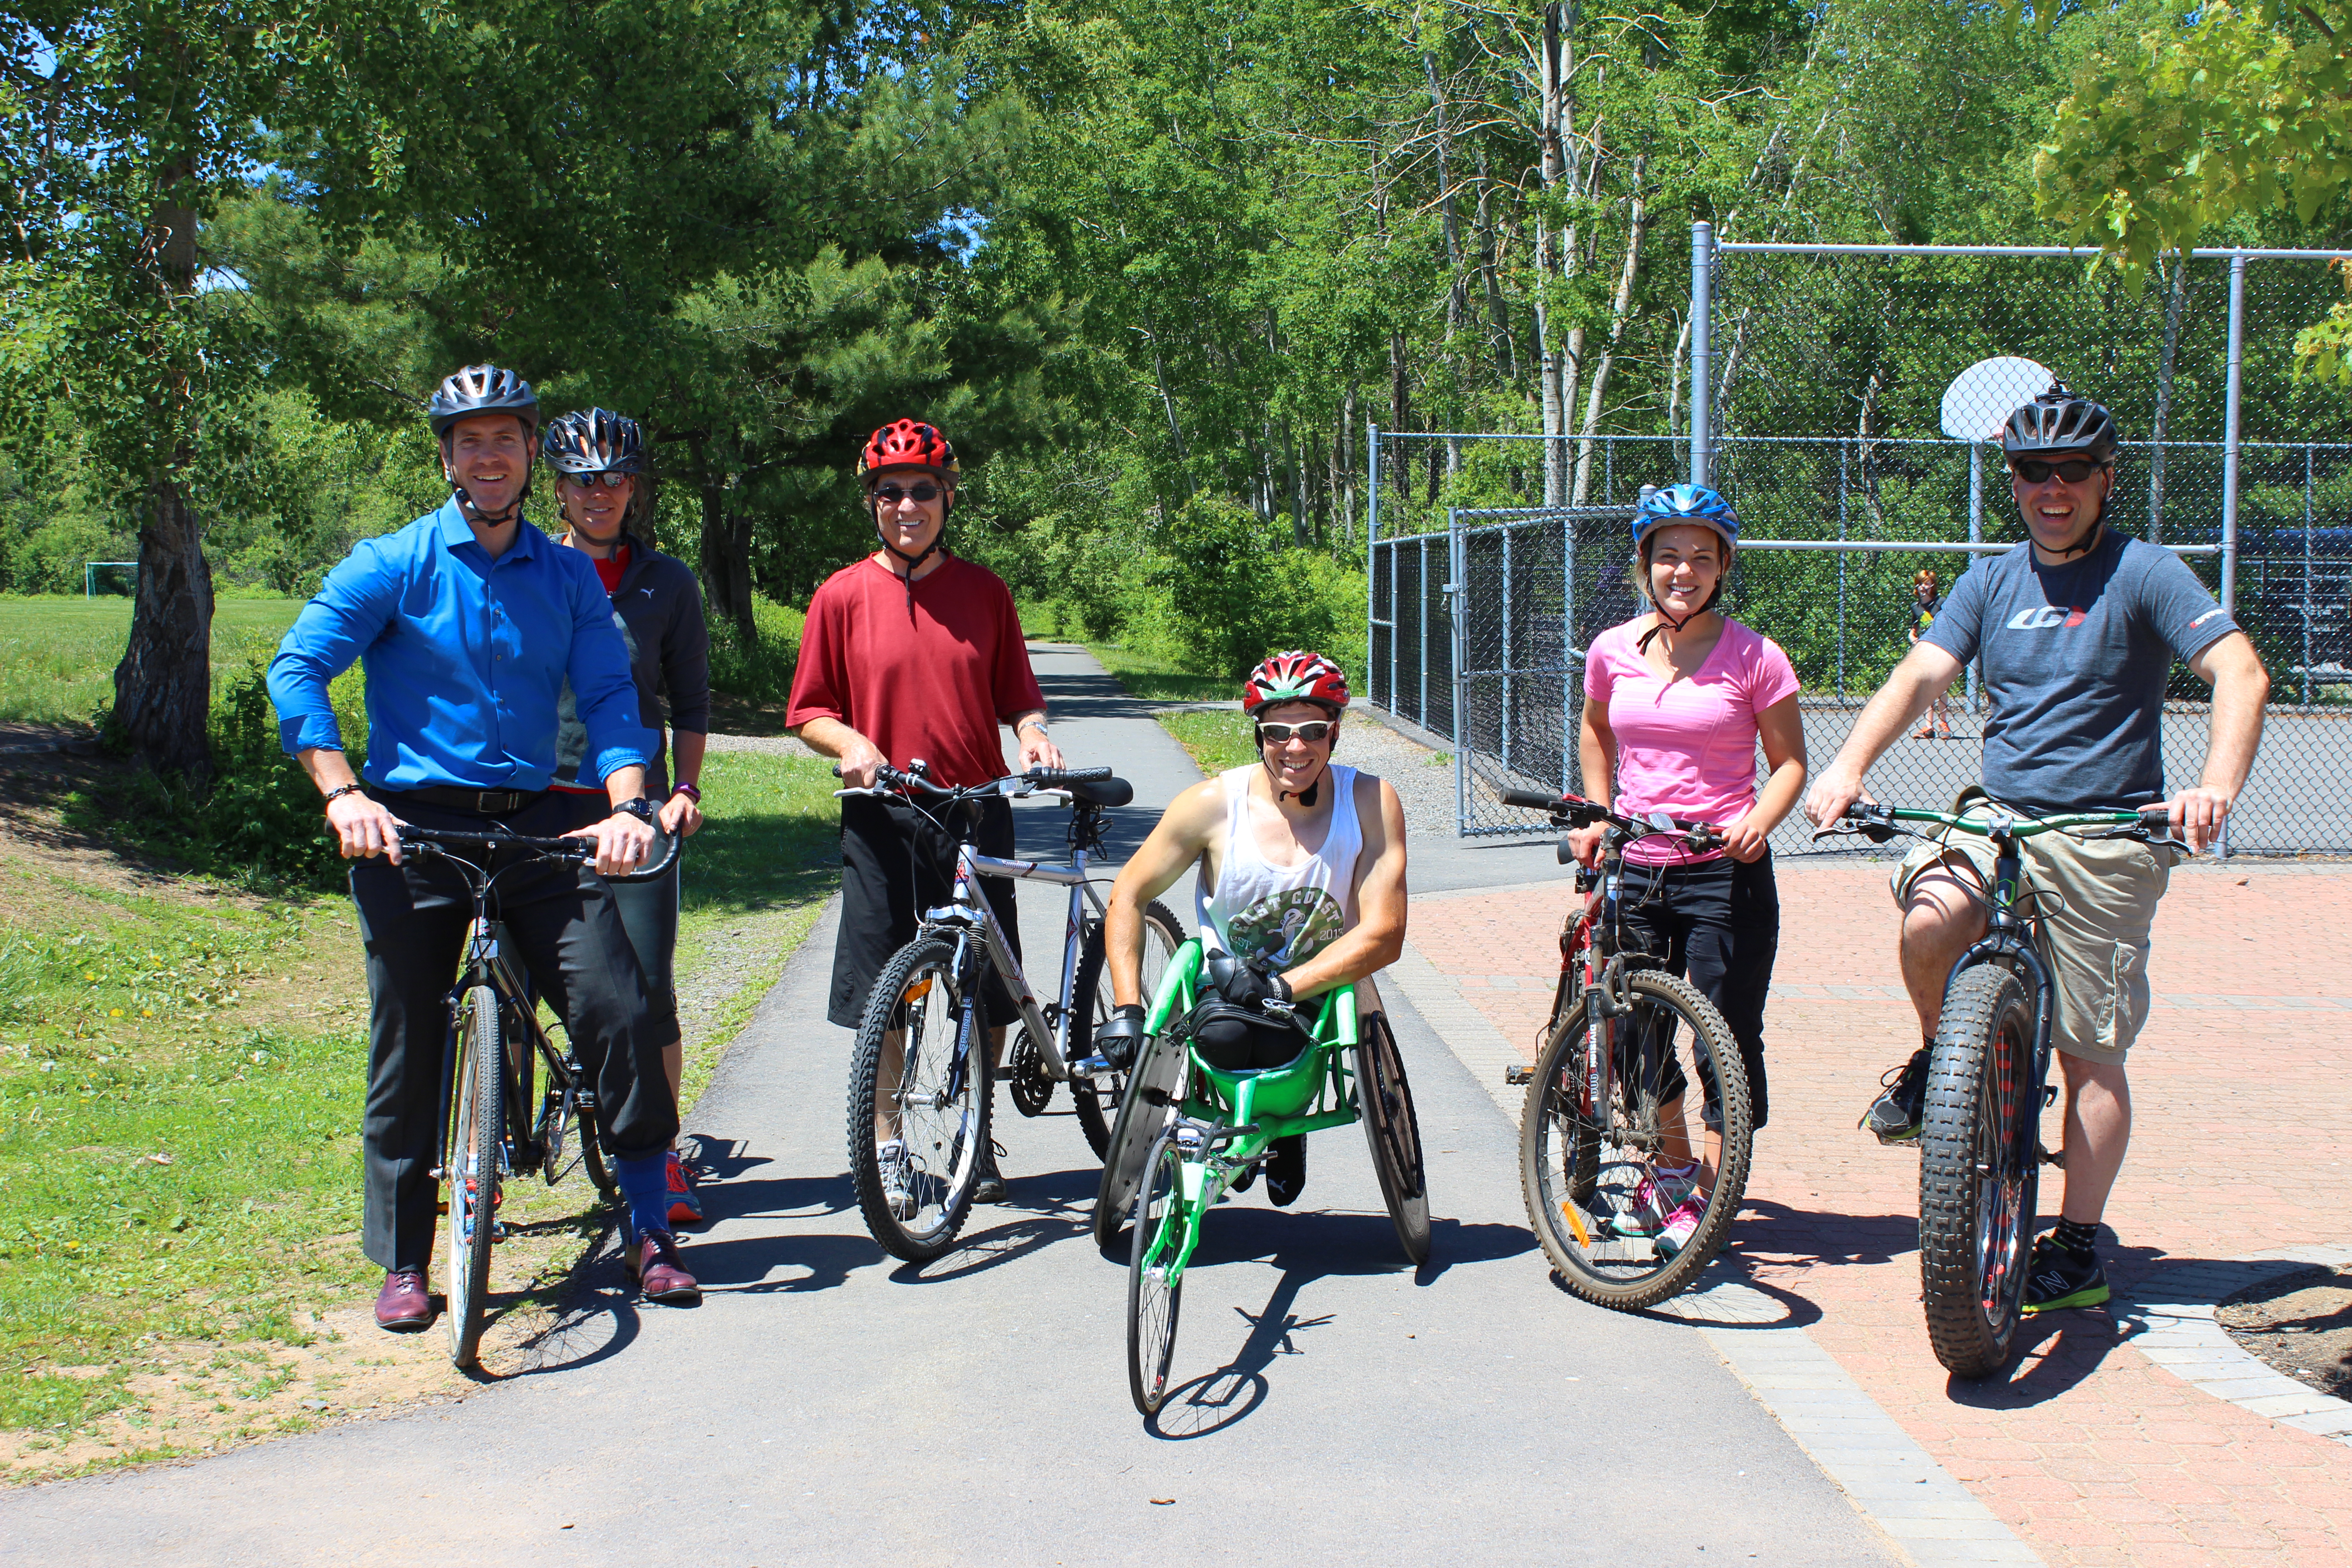 Cyclists smiling together on a trail